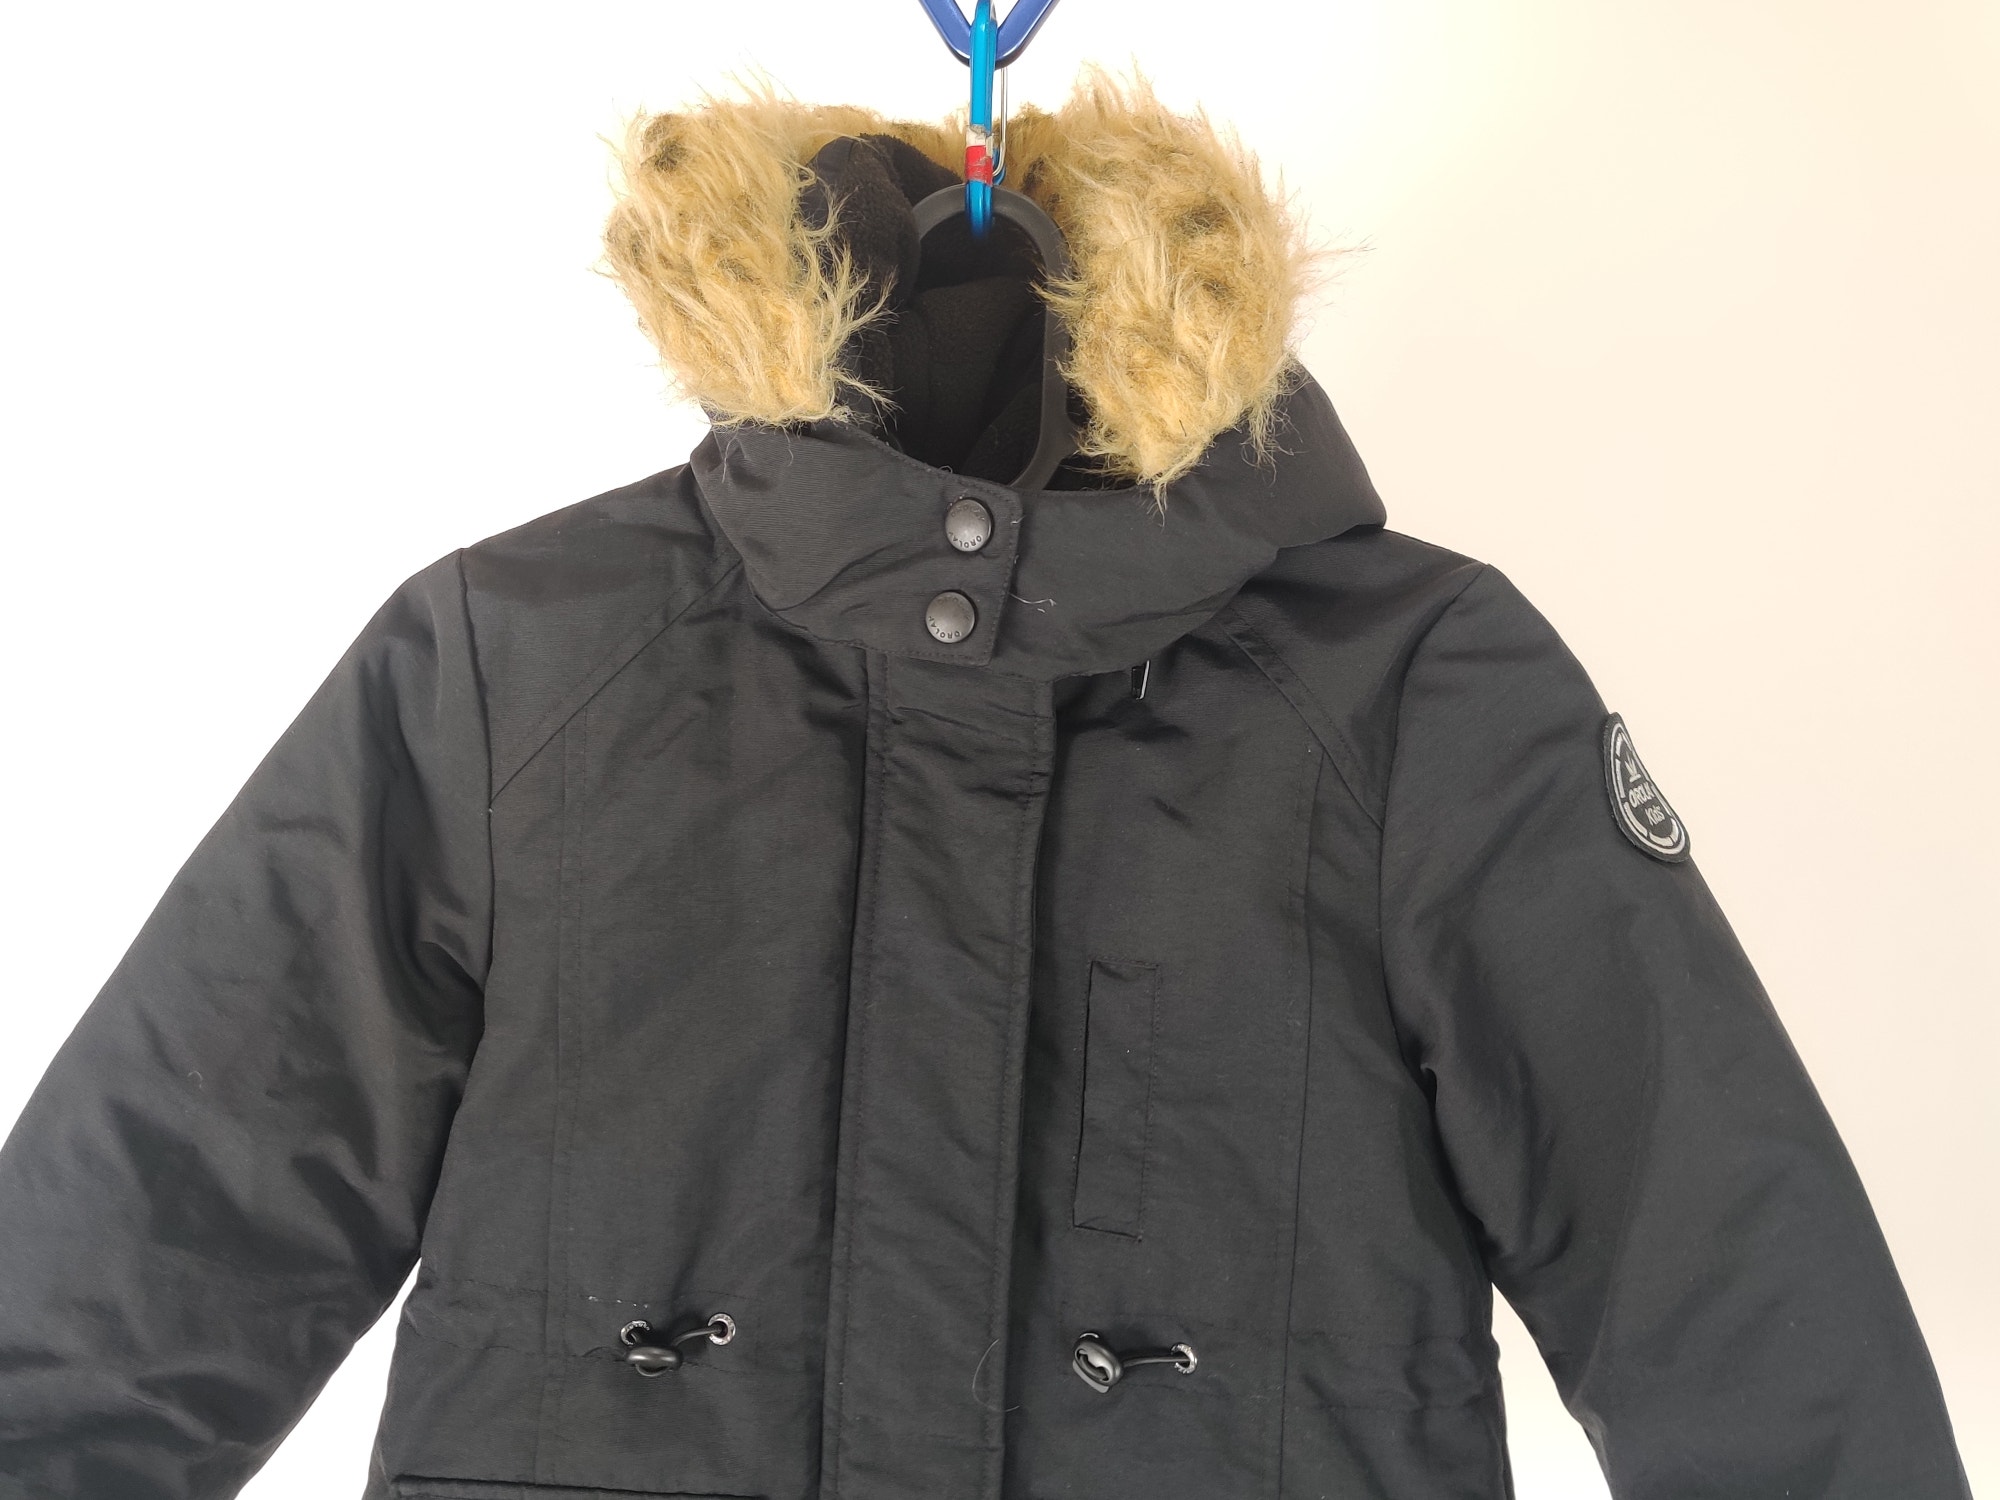 OROLAY KIDS DUCK DOWN HOOD GIRL'S BLACK POCKETS KID'S JACKET SIZE 6-7Y - Picture 3 of 12